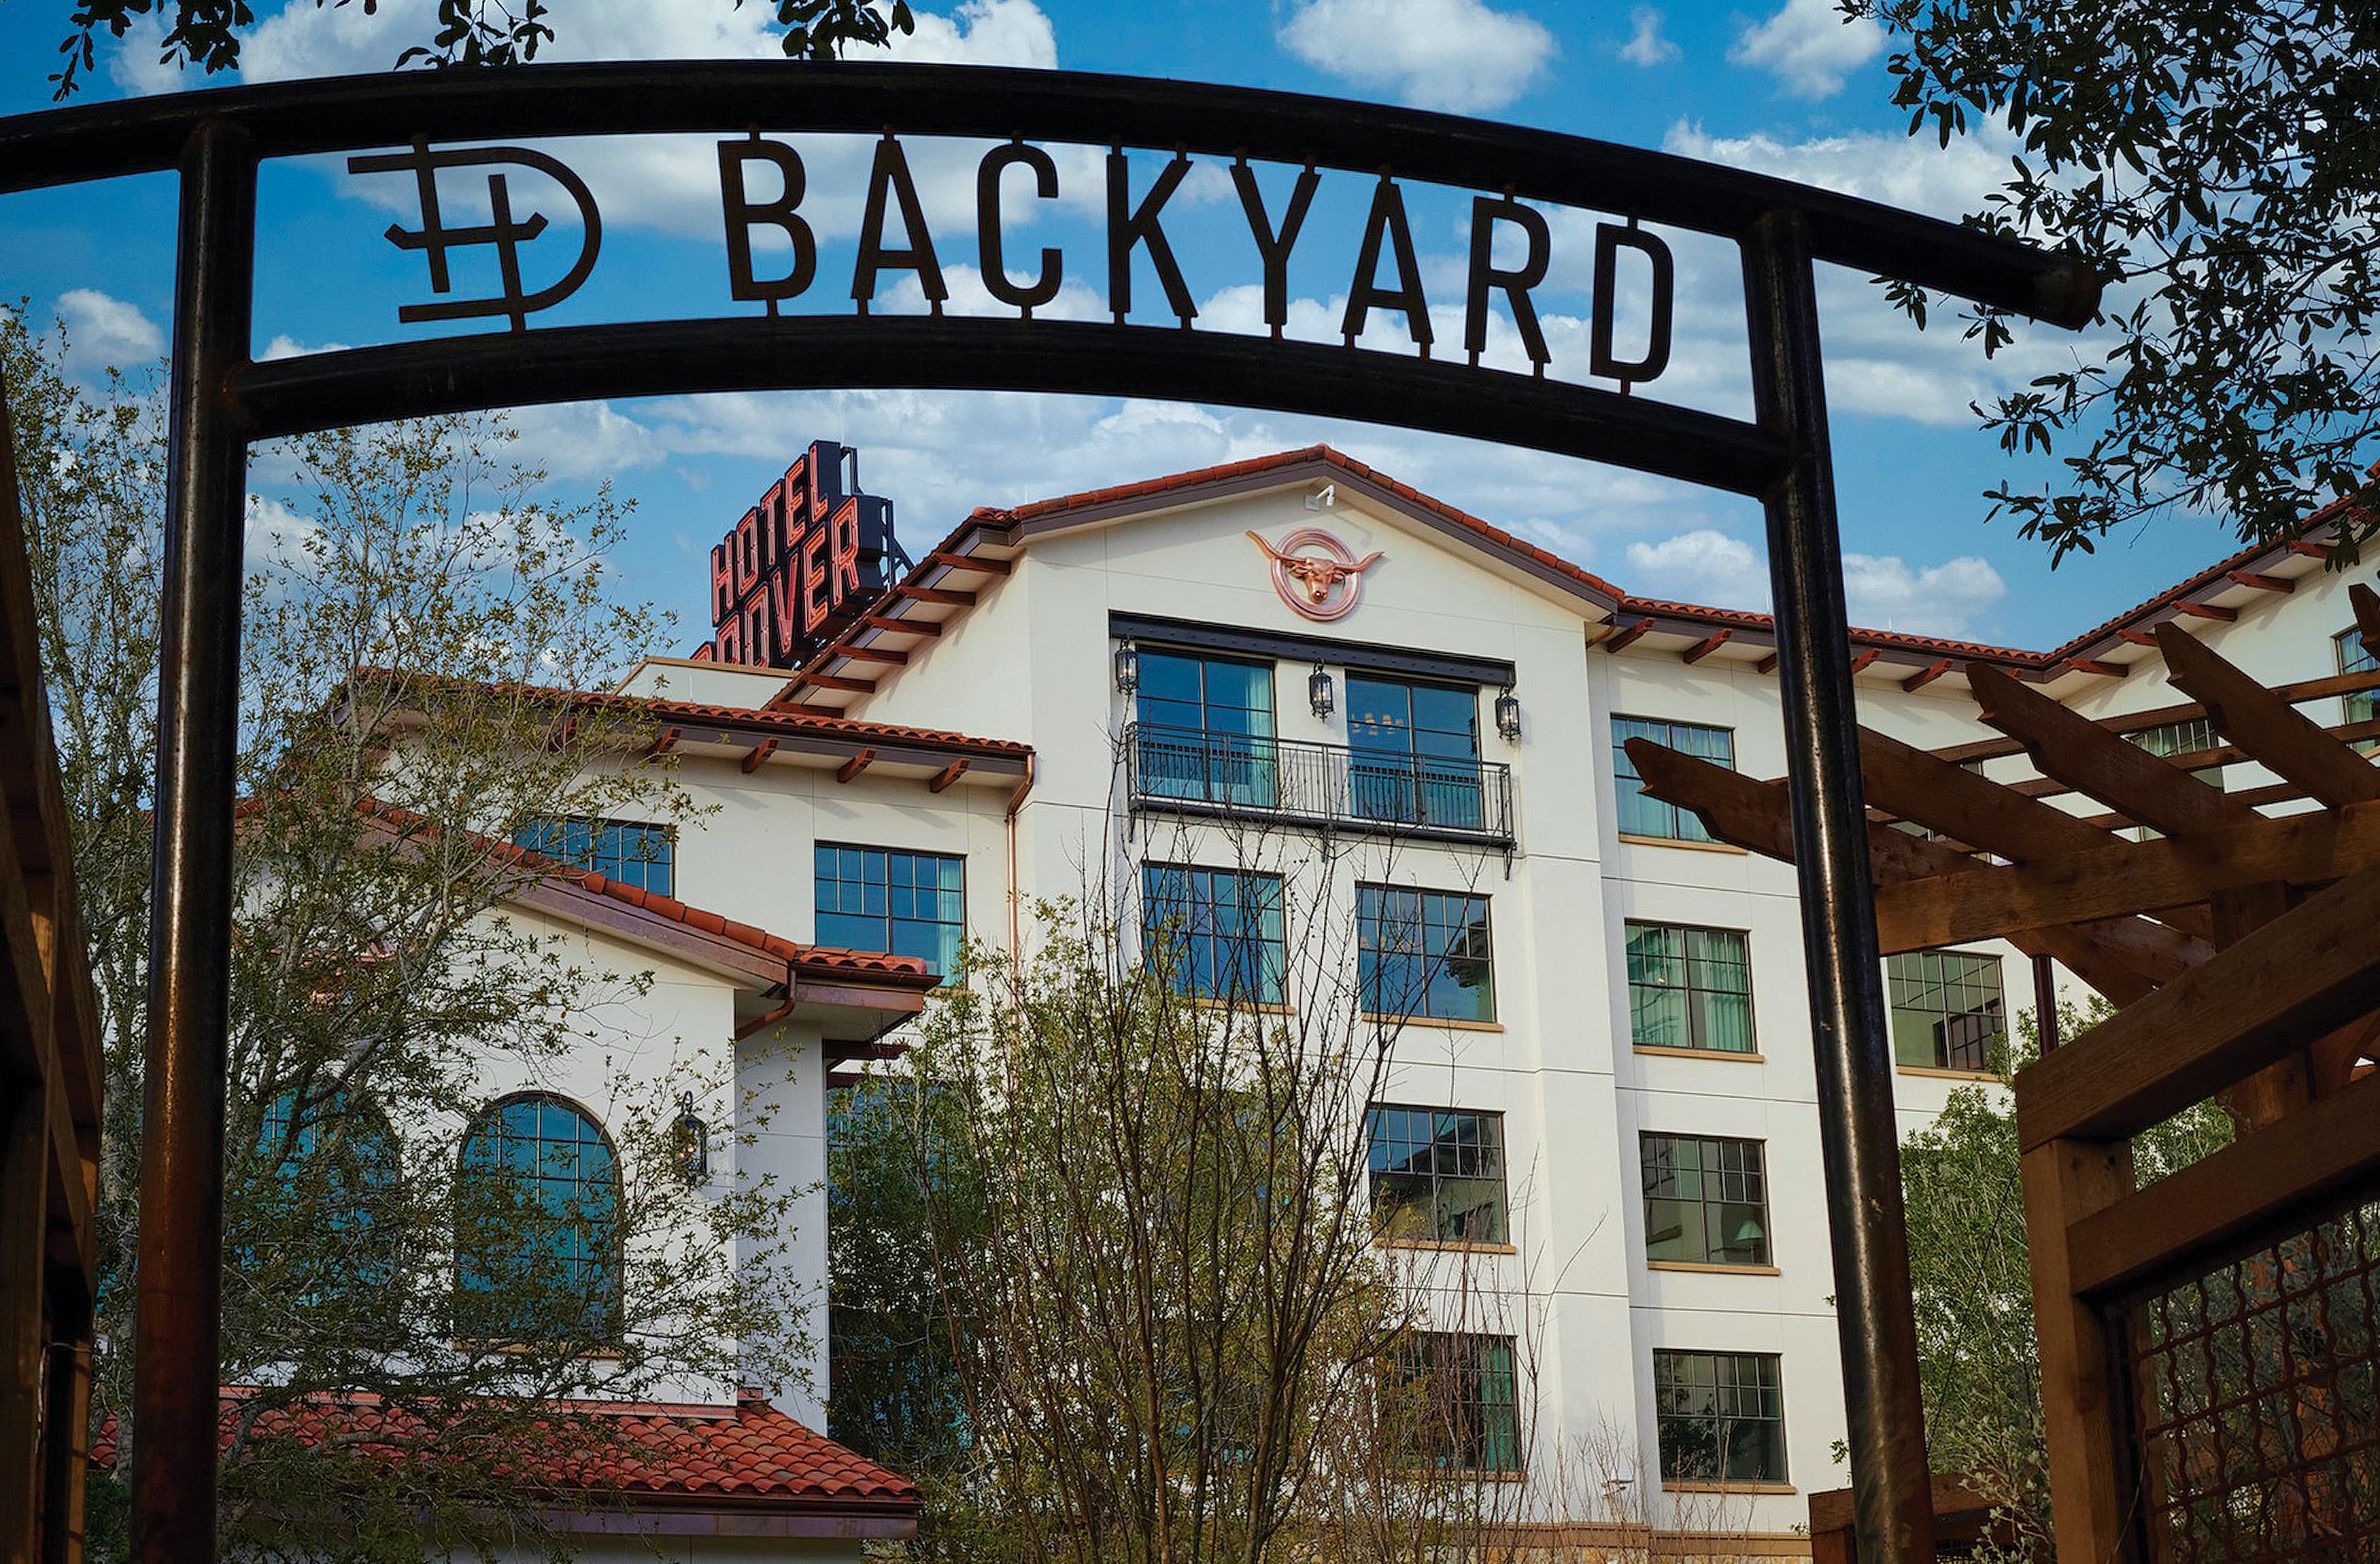 Exterior paseo identity for the "Backyard" for The Drover Hotel in Fort Worth, Texas.